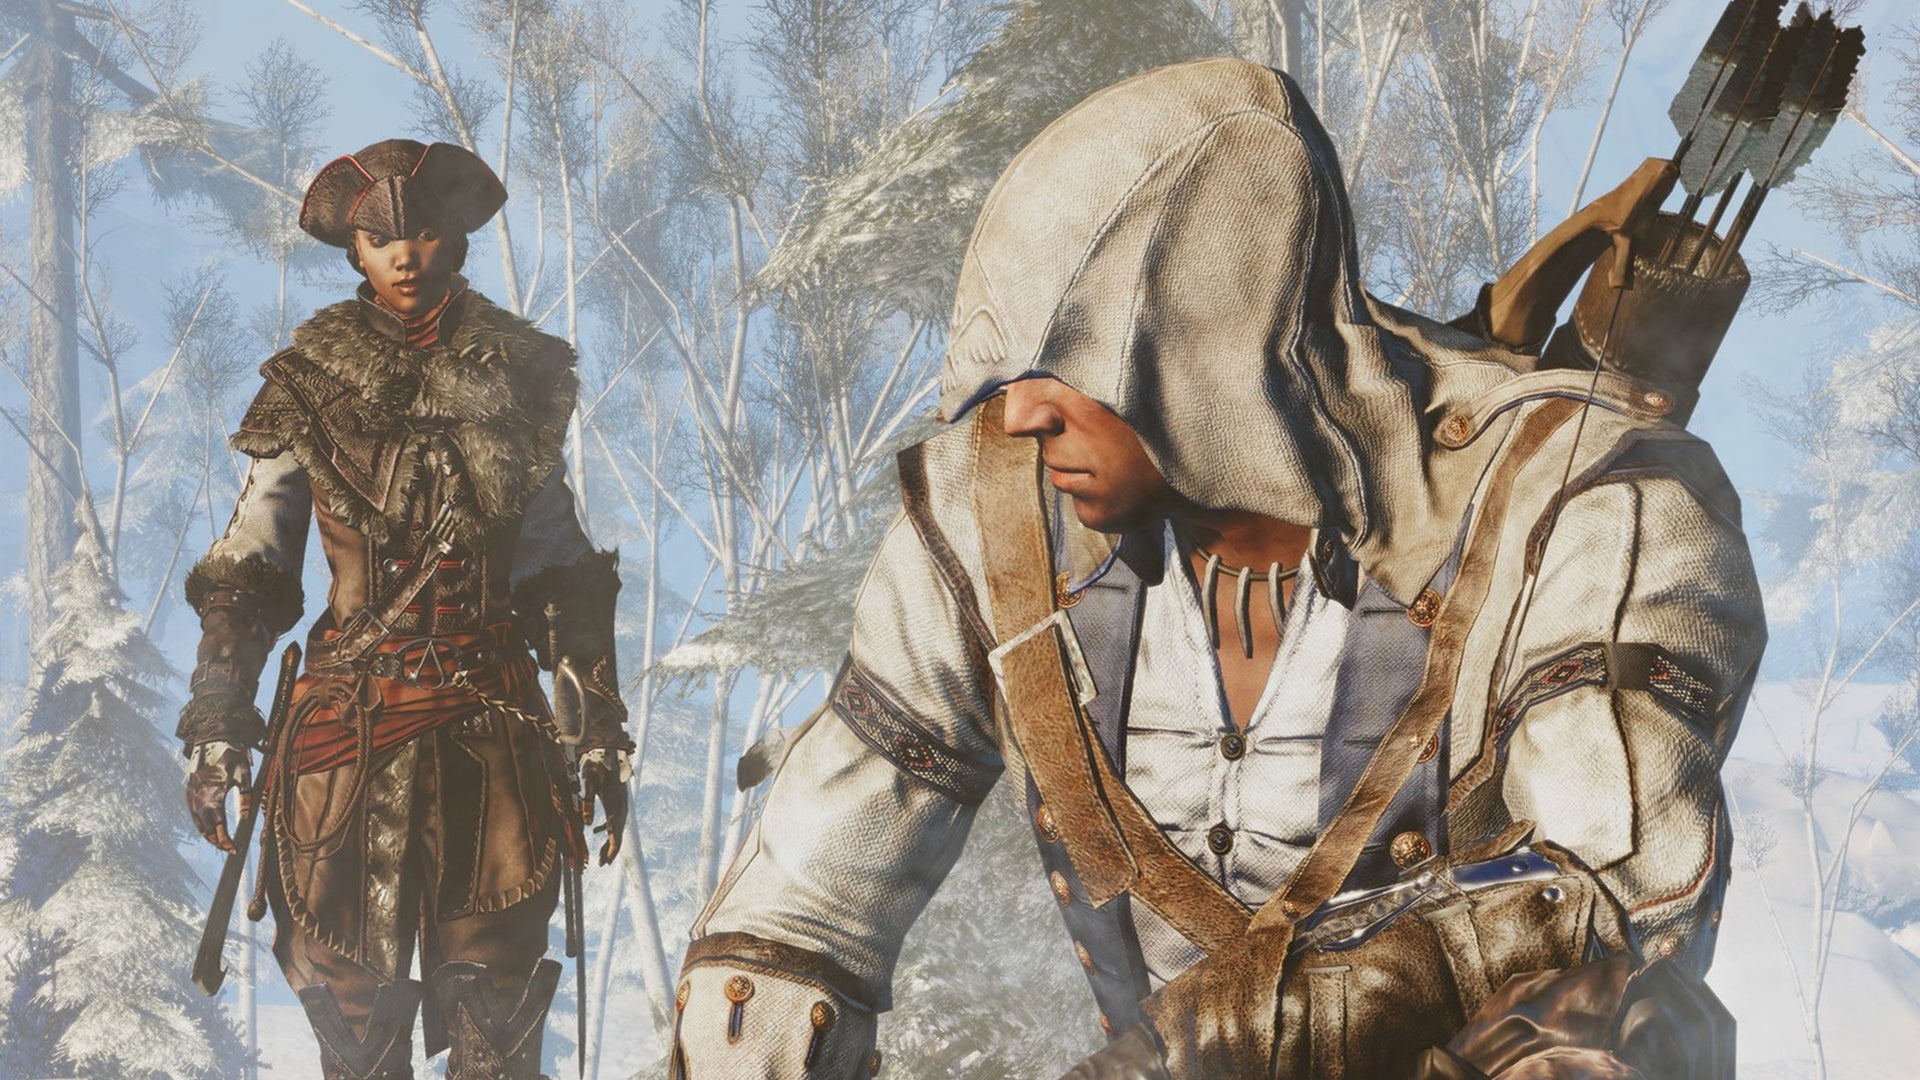 Image for Assassin's Creed 3: Remastered - Every Version Tested! Xbox One/X vs PS4/Pro/PC Comparison